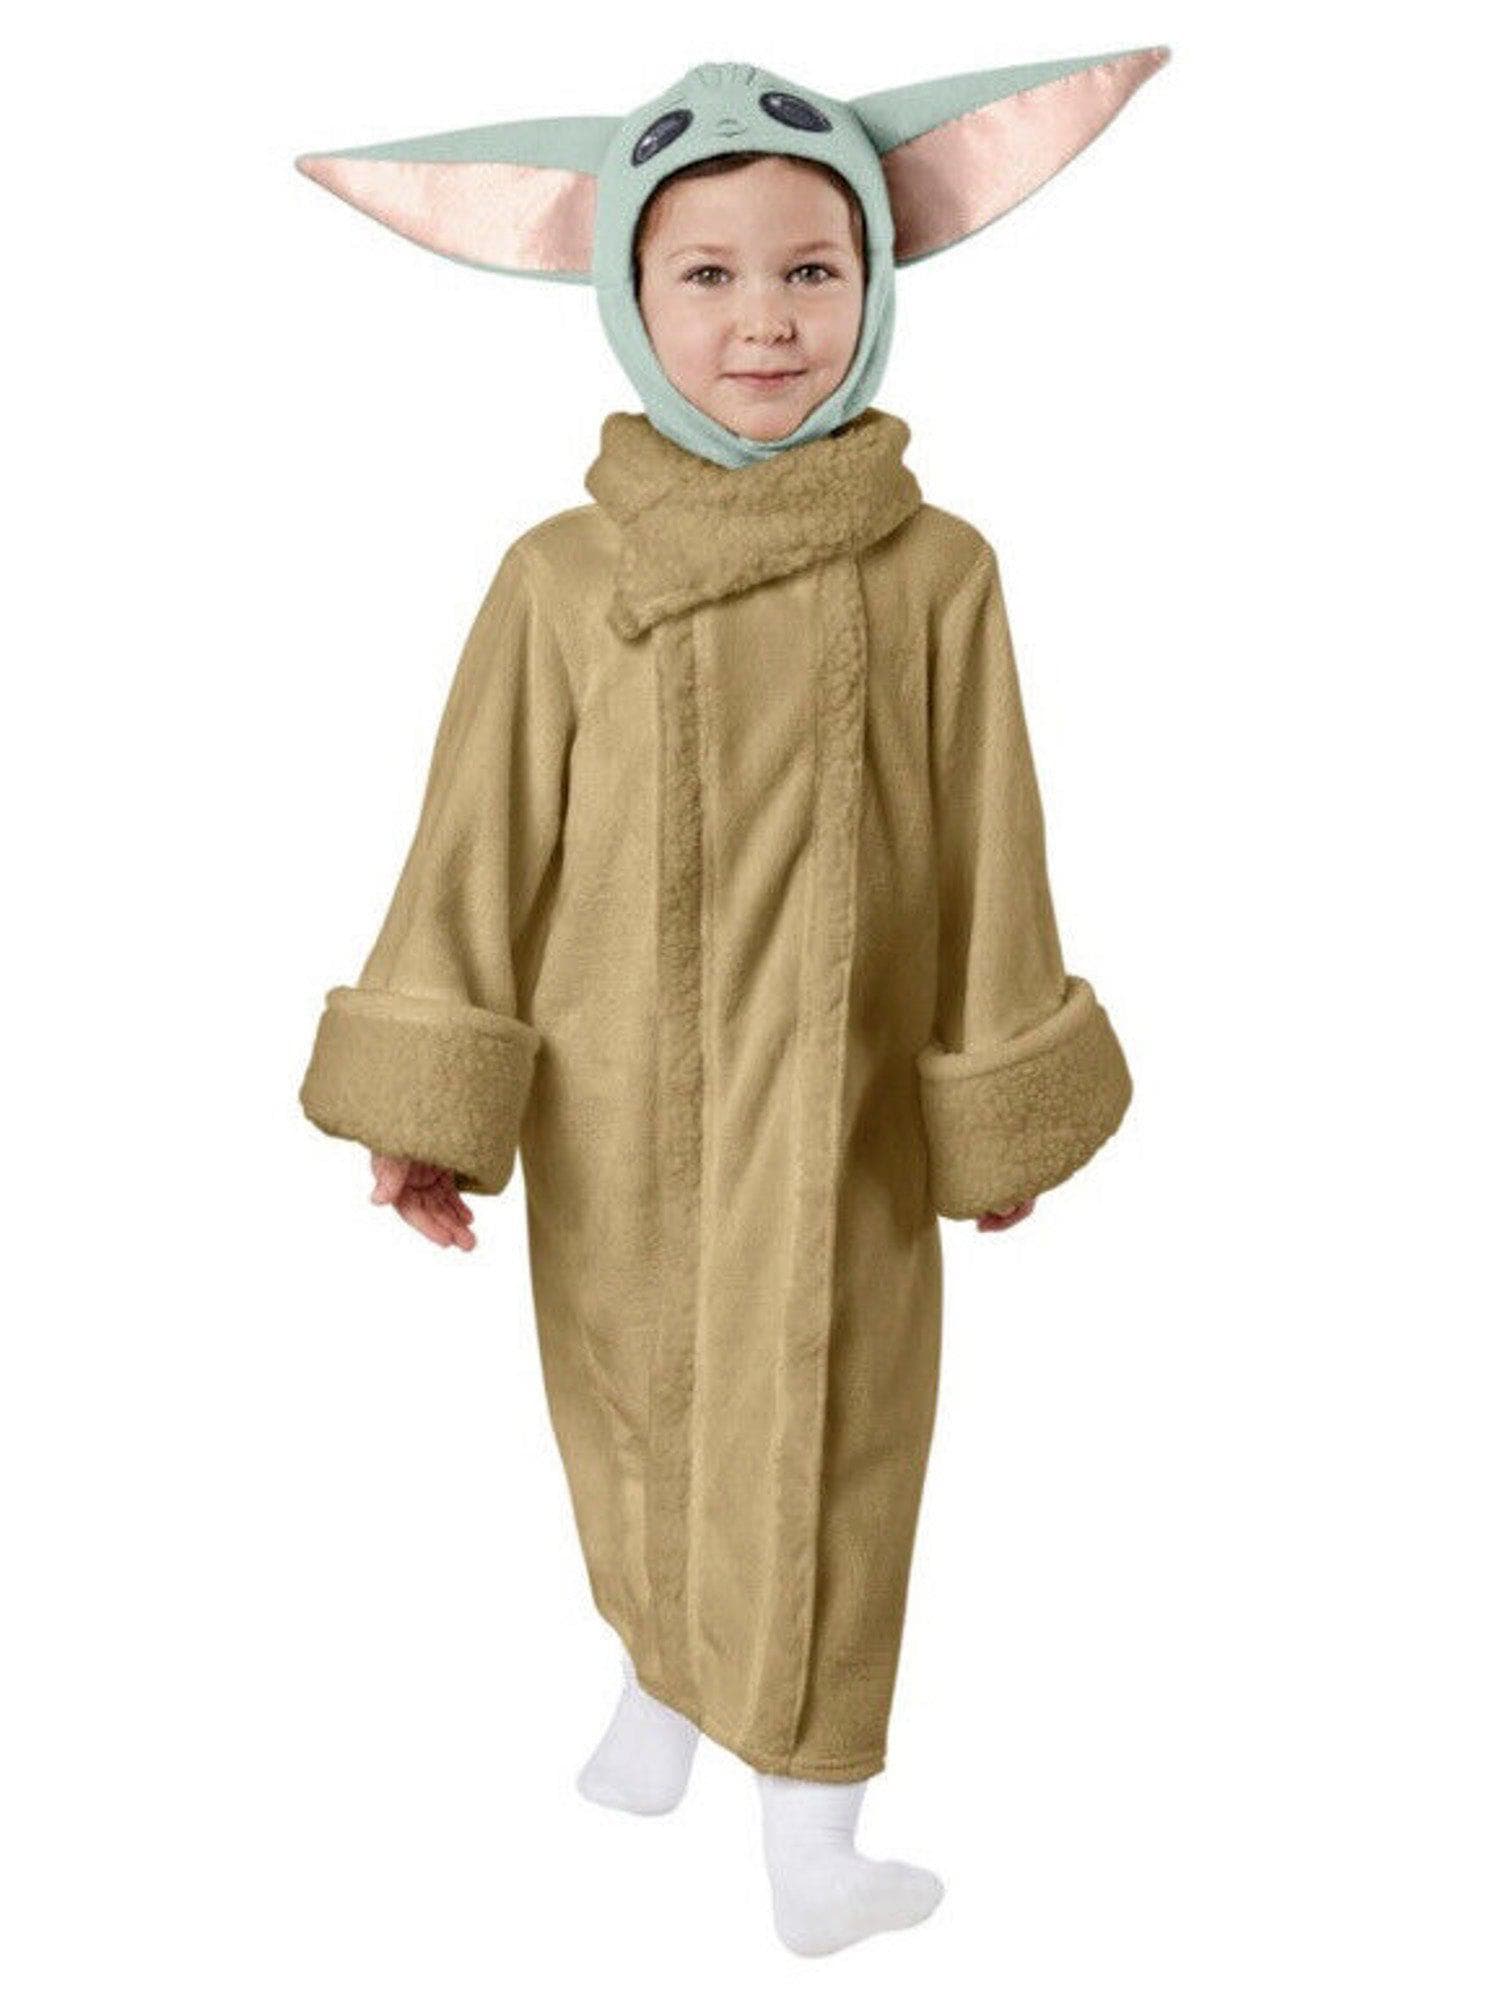 Star Wars The Child Toddler Costume - costumes.com